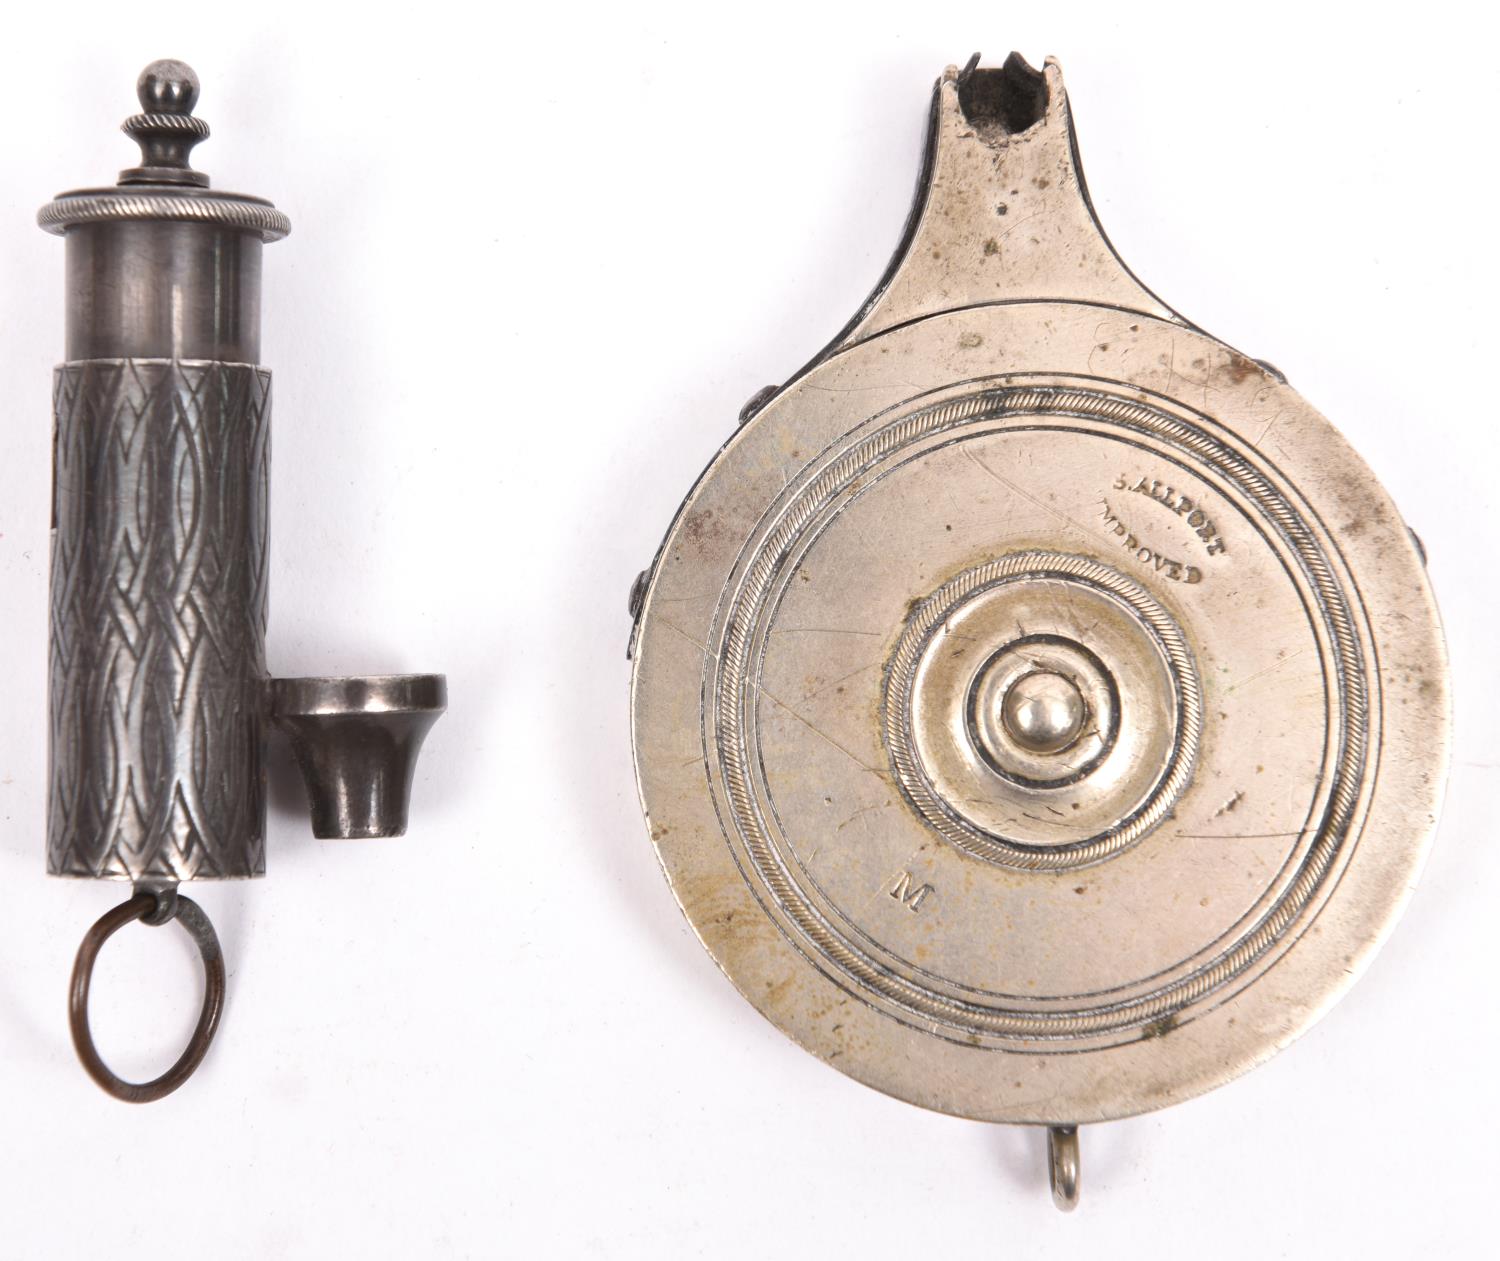 A German silver cap dispenser, marked "S. Allport Improved"; and an engraved brass spring loaded